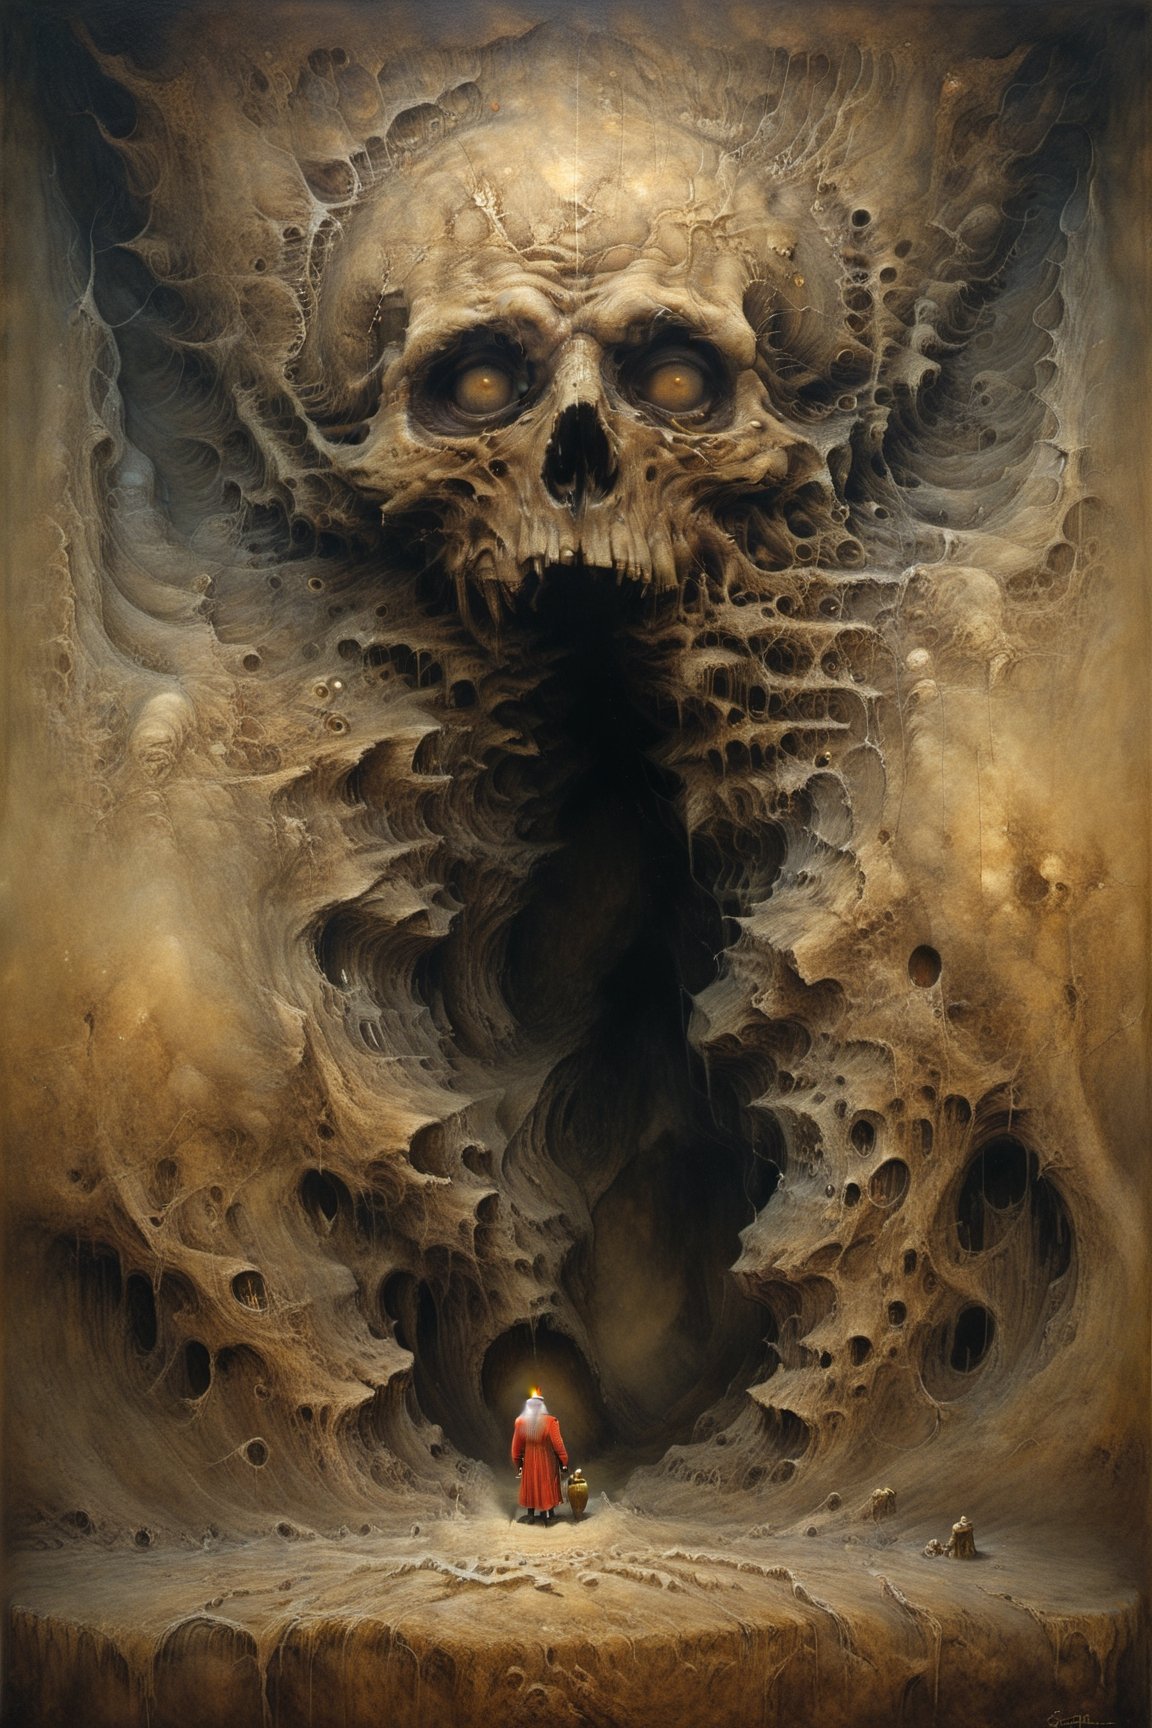 Painting made by Zdzislaw Beksinski, gift from hollow one, christmas, eldritch santa claus, landspace, masterpiece, megalophobia, acid trip, unsettling feel, oil painting on hardboard, saturated sepia colors, photorealistic, Beksinski,more detail XL,art by sargent,cinematic  moviemaker style